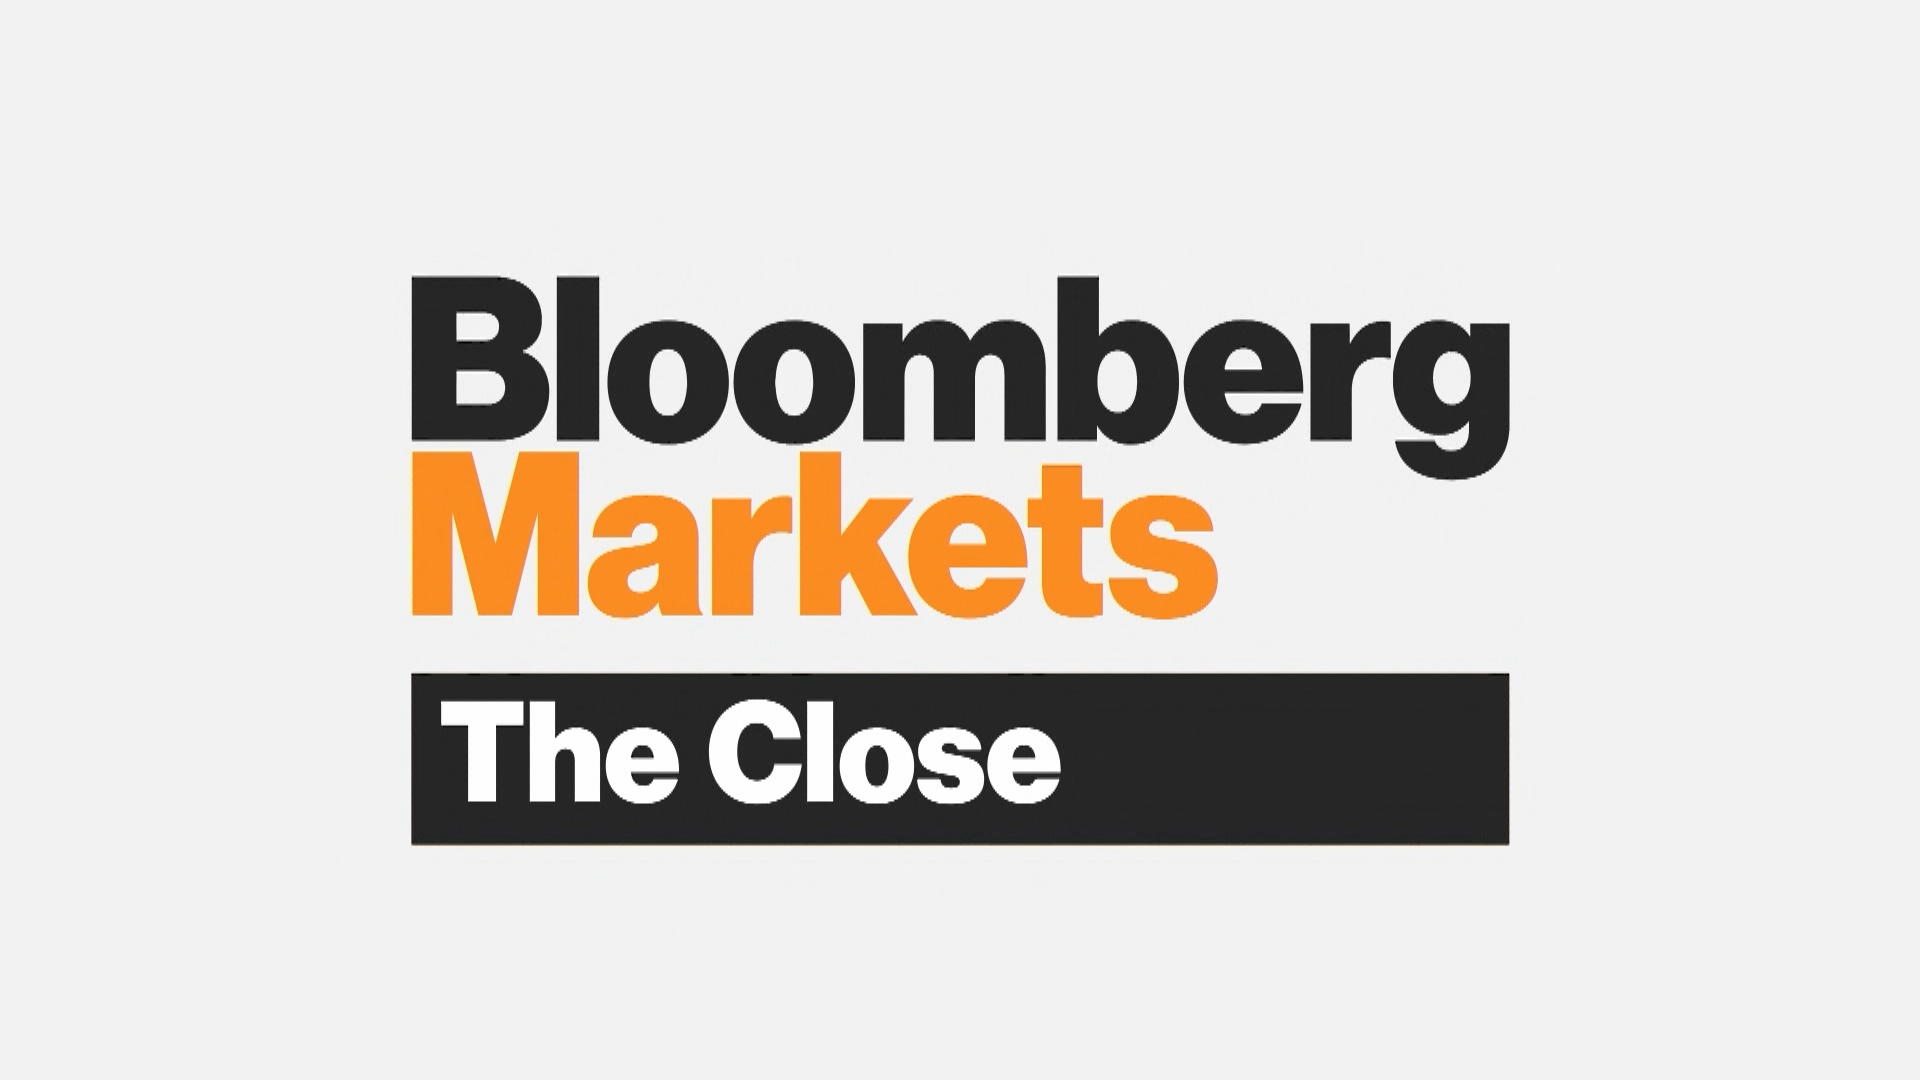 Https Www Bloomberg Com News Videos 2019 05 20 Looking For A Images, Photos, Reviews